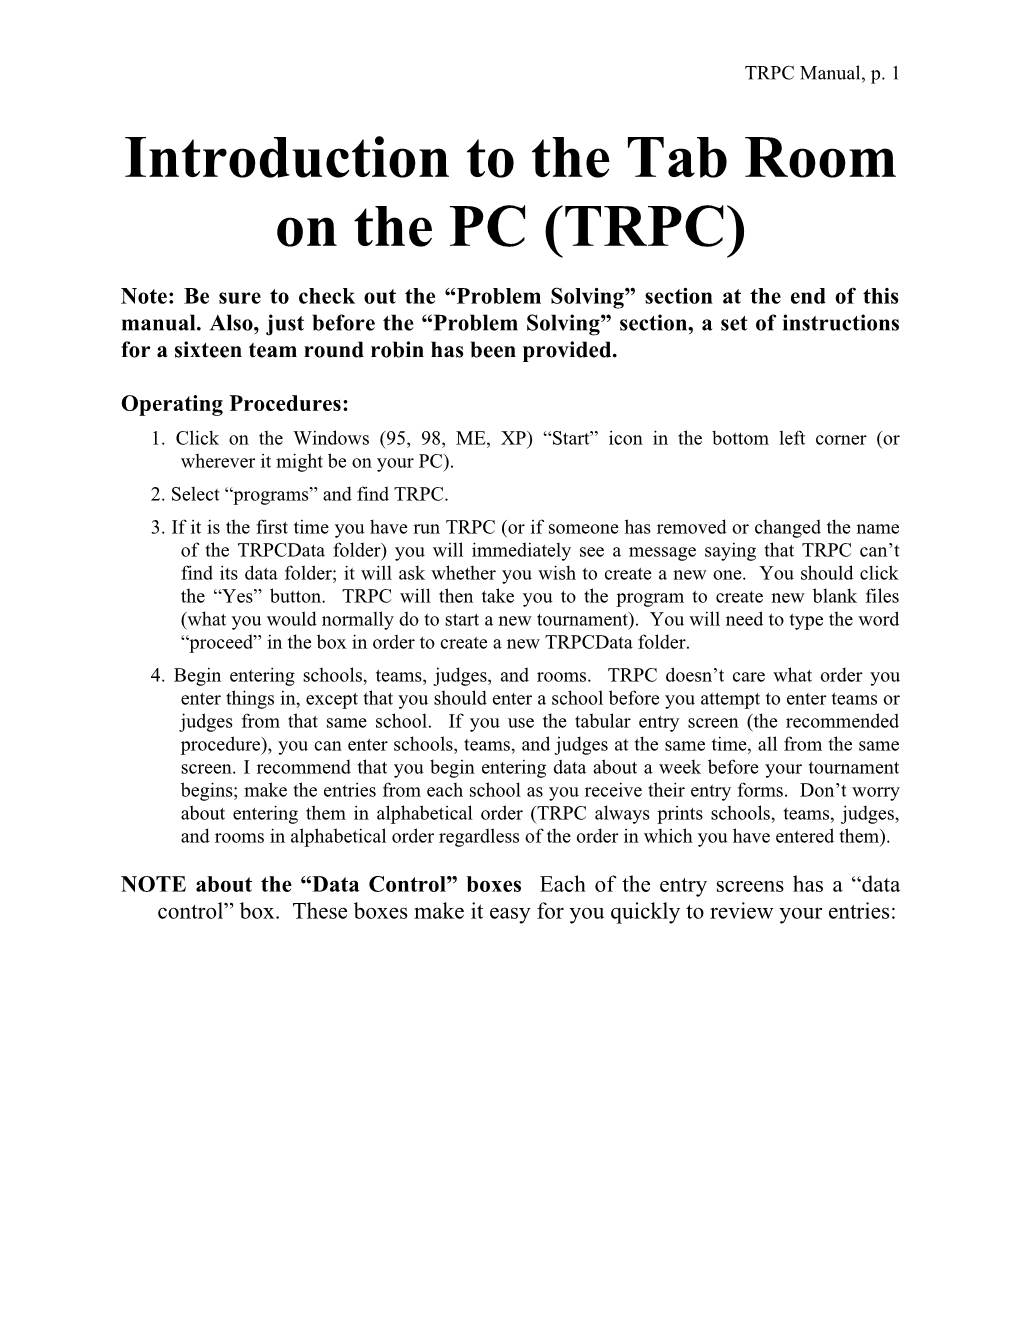 Introduction to the Tab Room on the PC (TRPC)